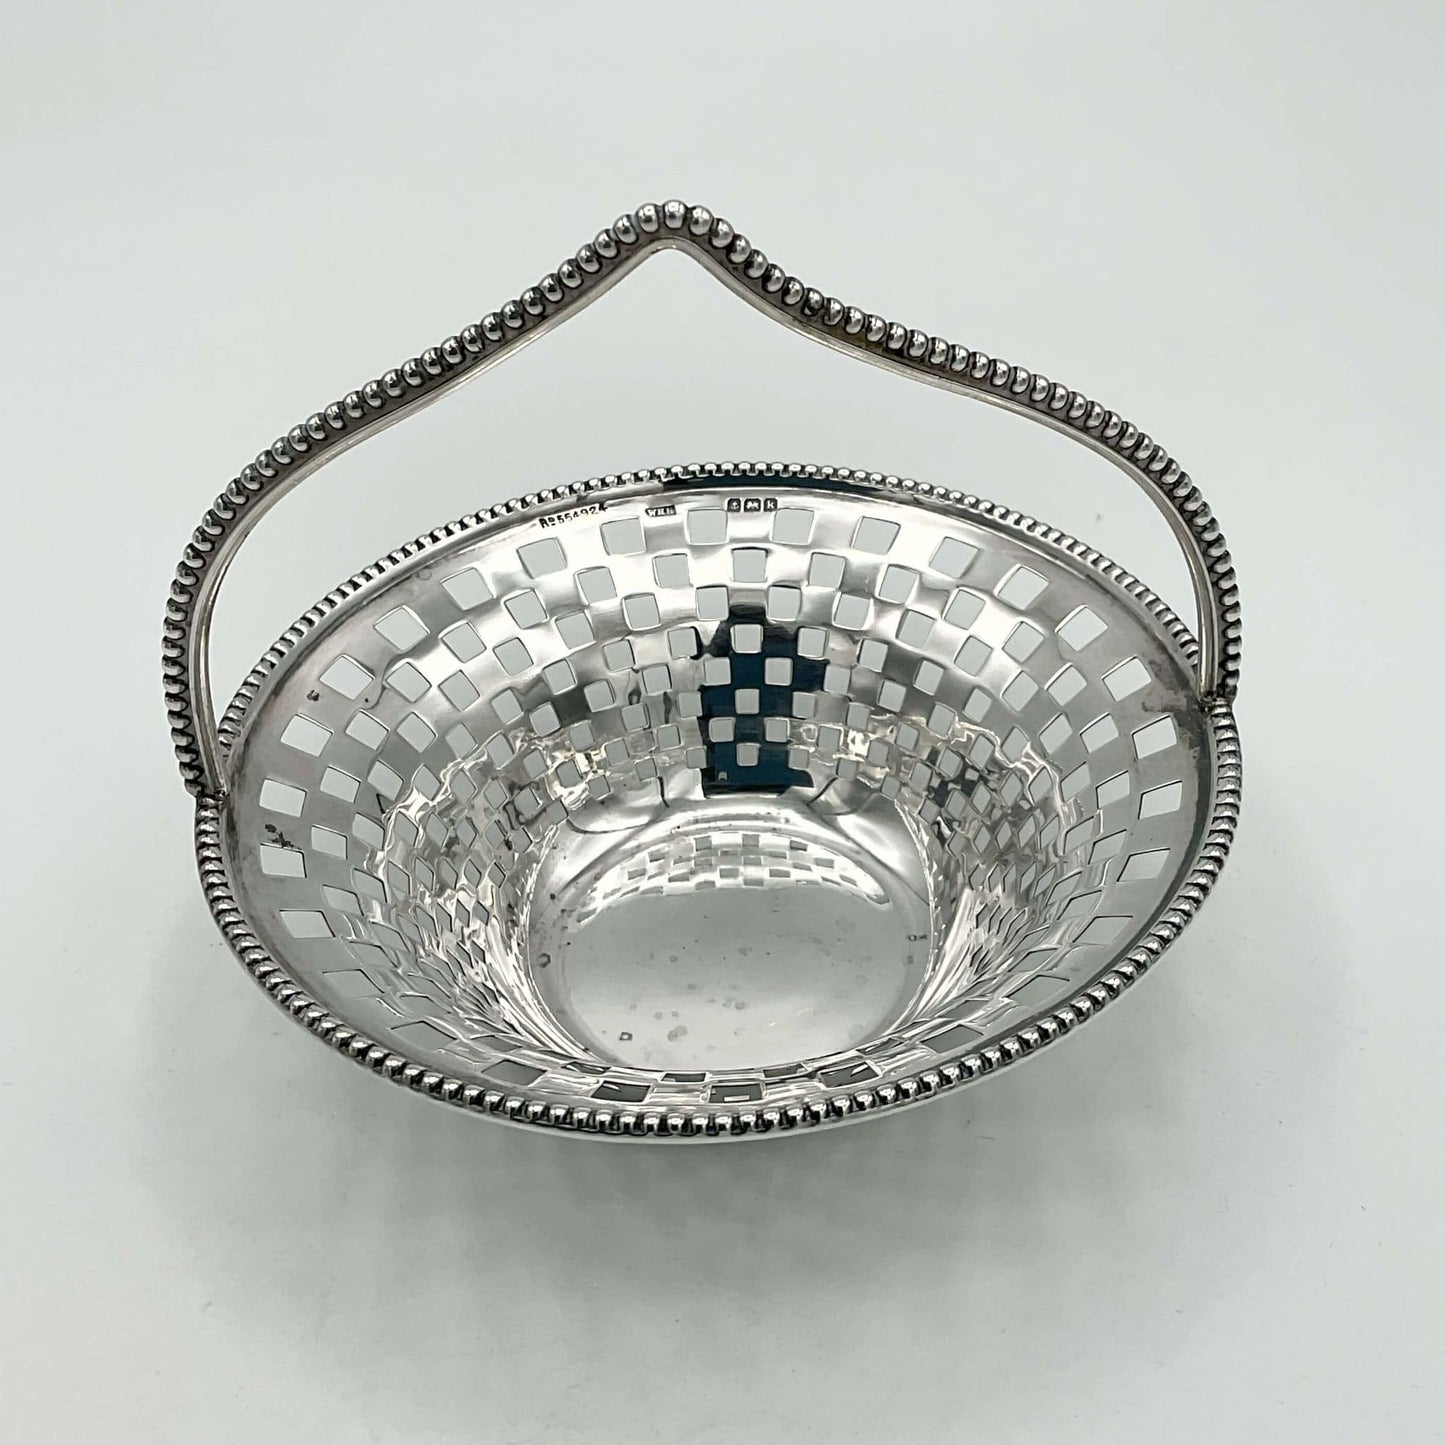 Antique Silver Basket with handle on white background